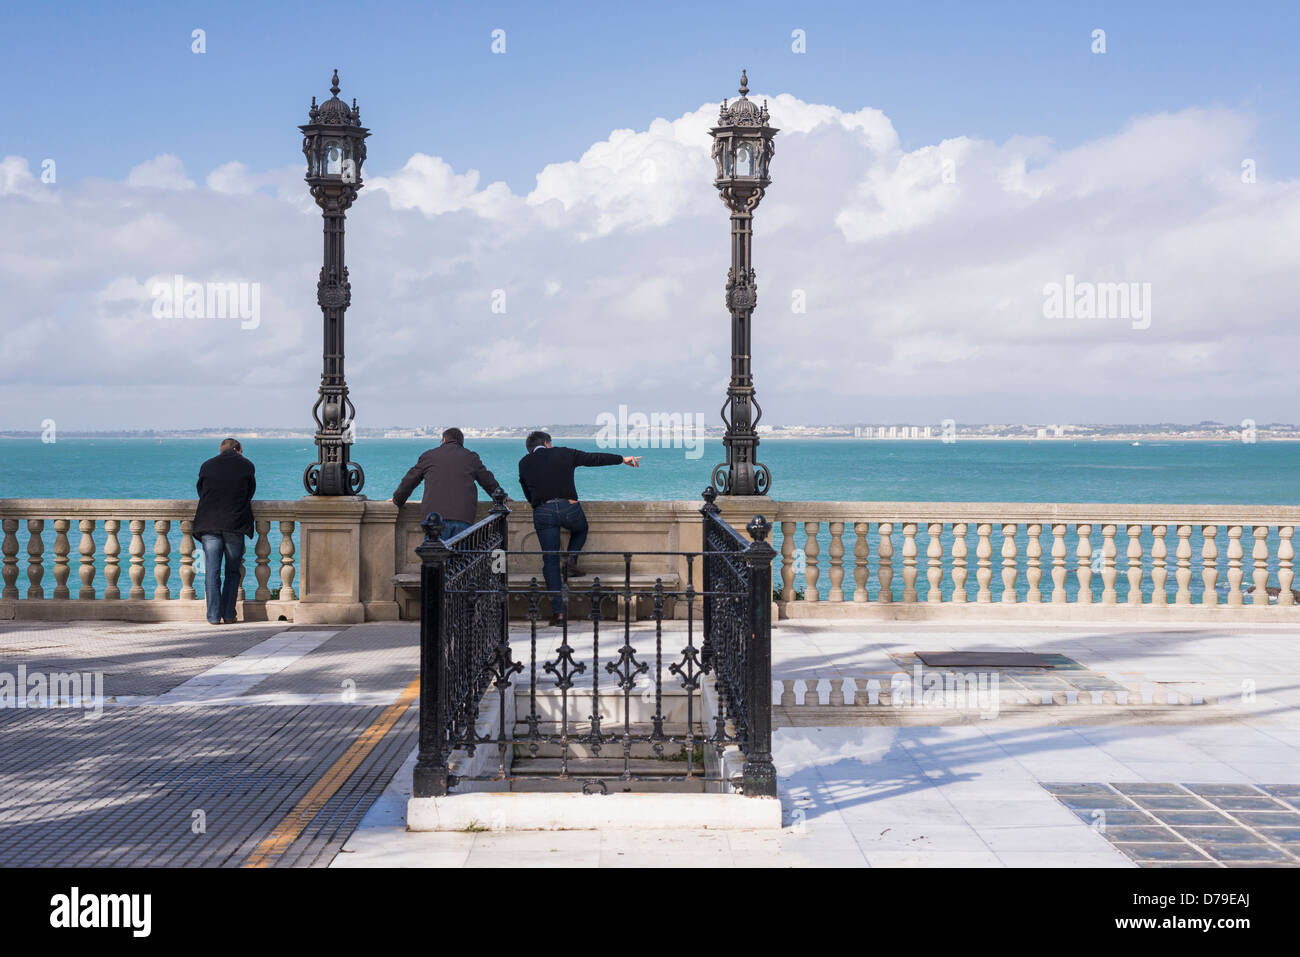 Three men looking out to sea on seafront promenade Cadiz Andalusia Spain Stock Photo